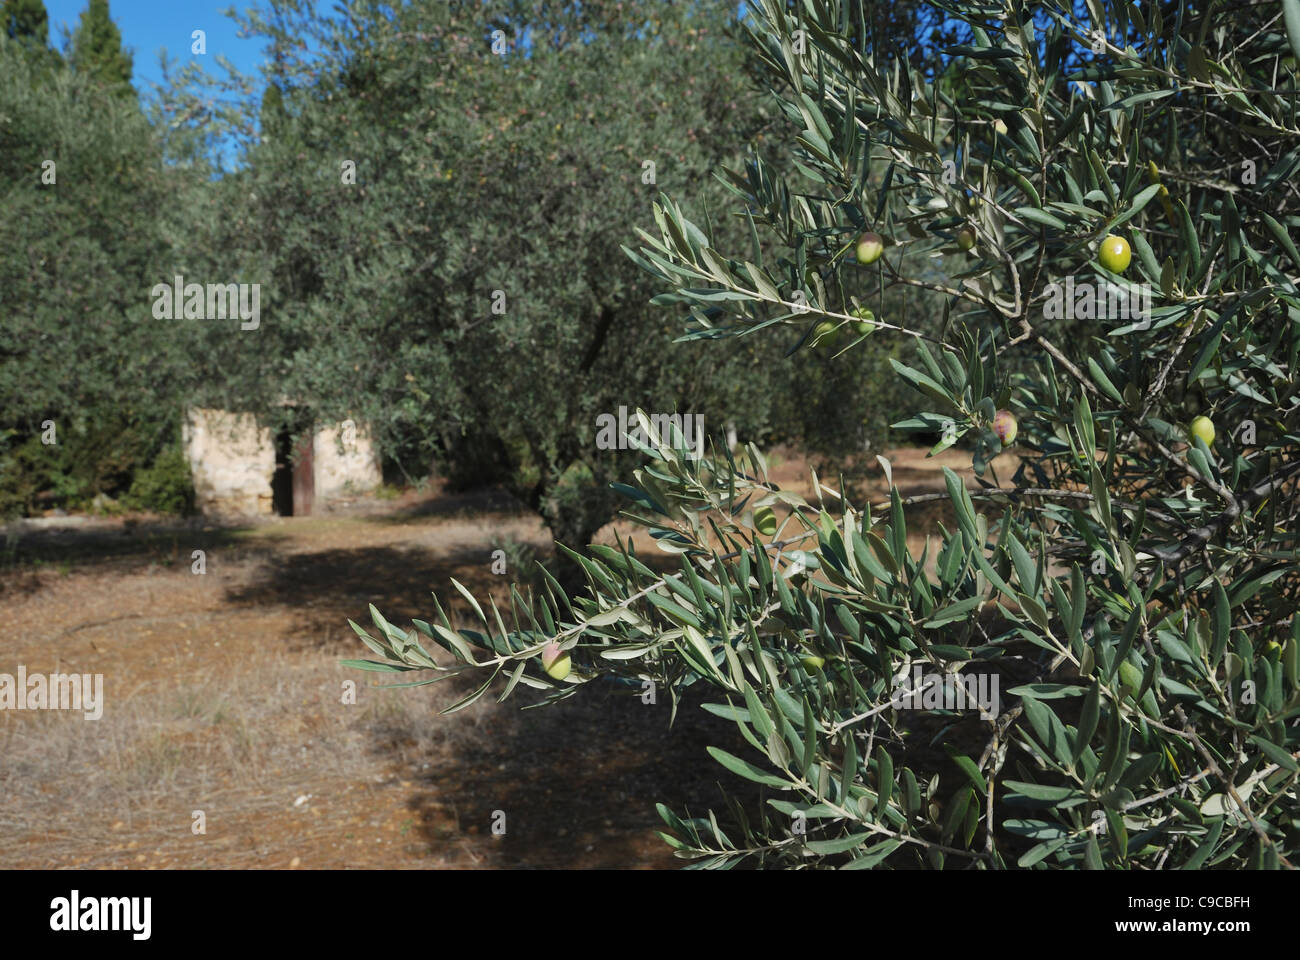 Olives growing in the olive grove at Chateau de Lourmarin, Lourmarin, Provence, France. Stock Photo